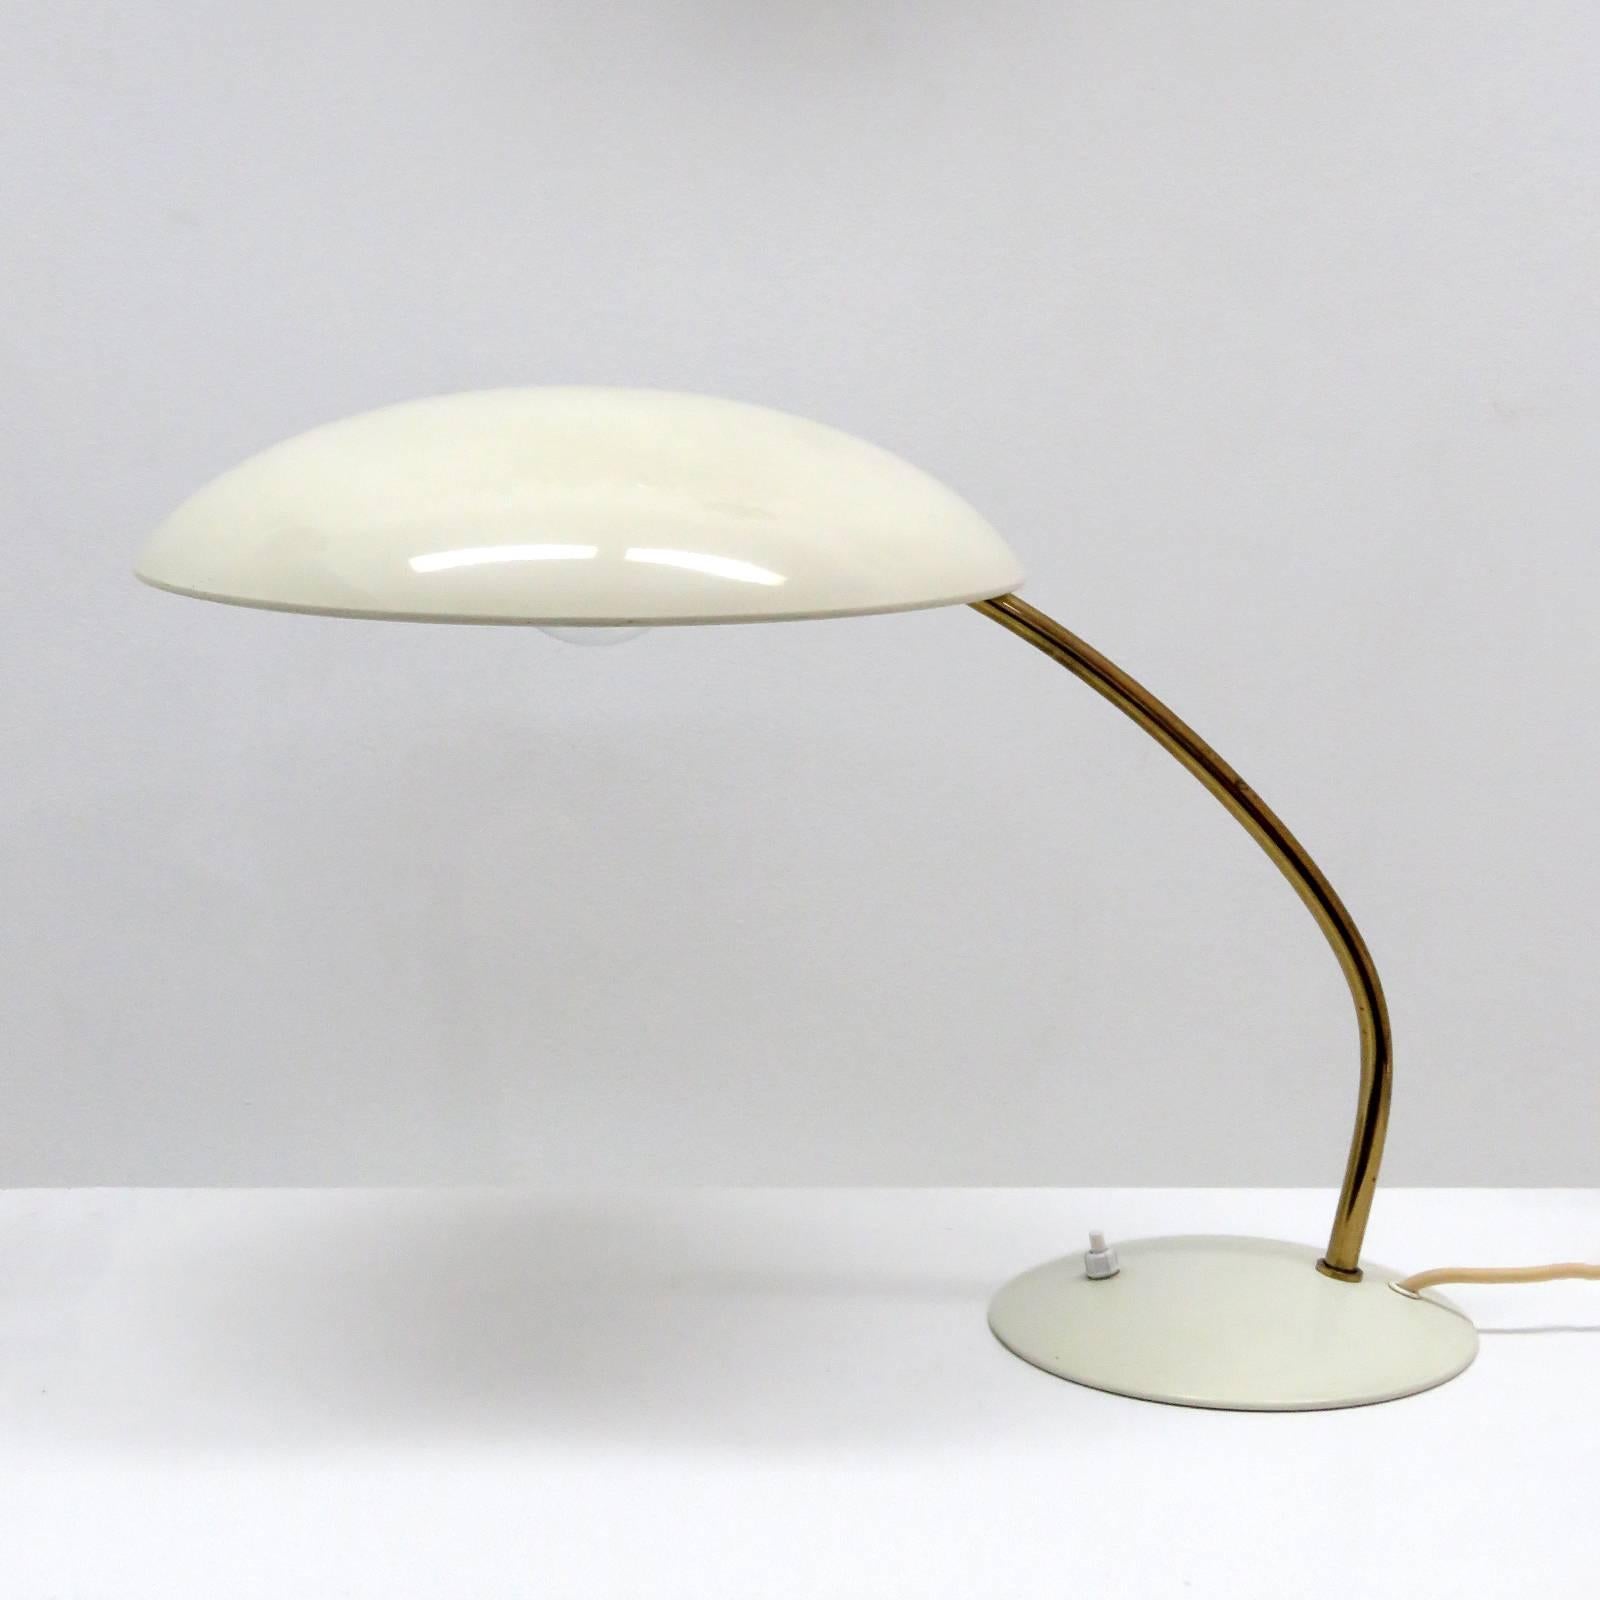 Original ivory enameled steel desk/ task lamps model '6782' by Christian Dell for Kaiser Idell, with a curved pivoting brass arm and a broad dome shade, marked.